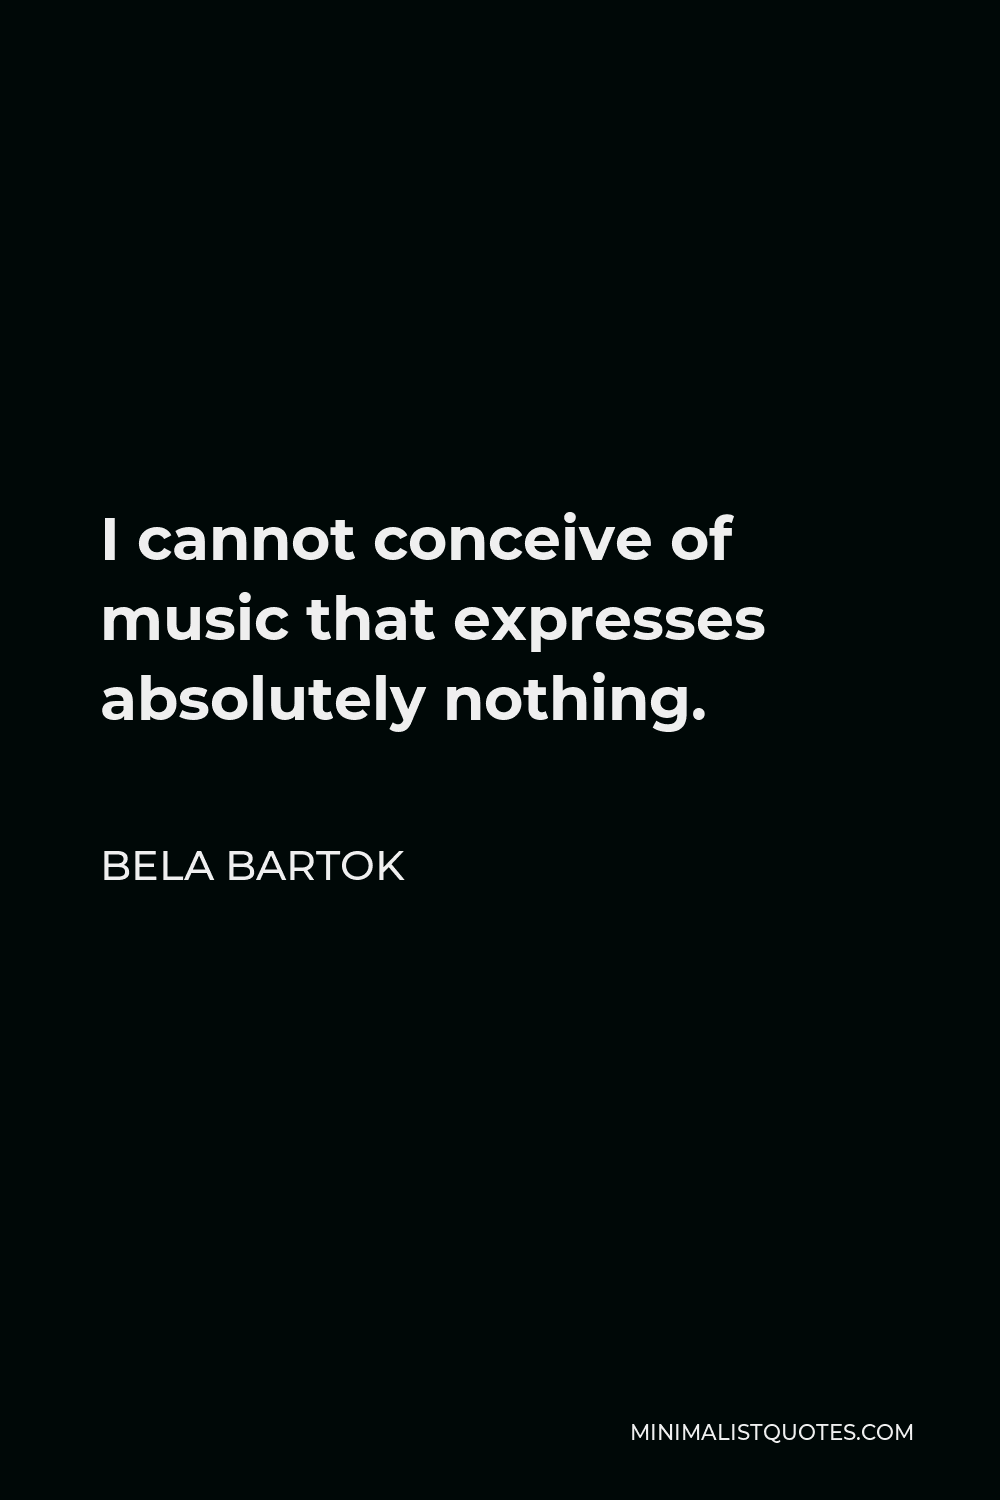 Bela Bartok Quote - I cannot conceive of music that expresses absolutely nothing.